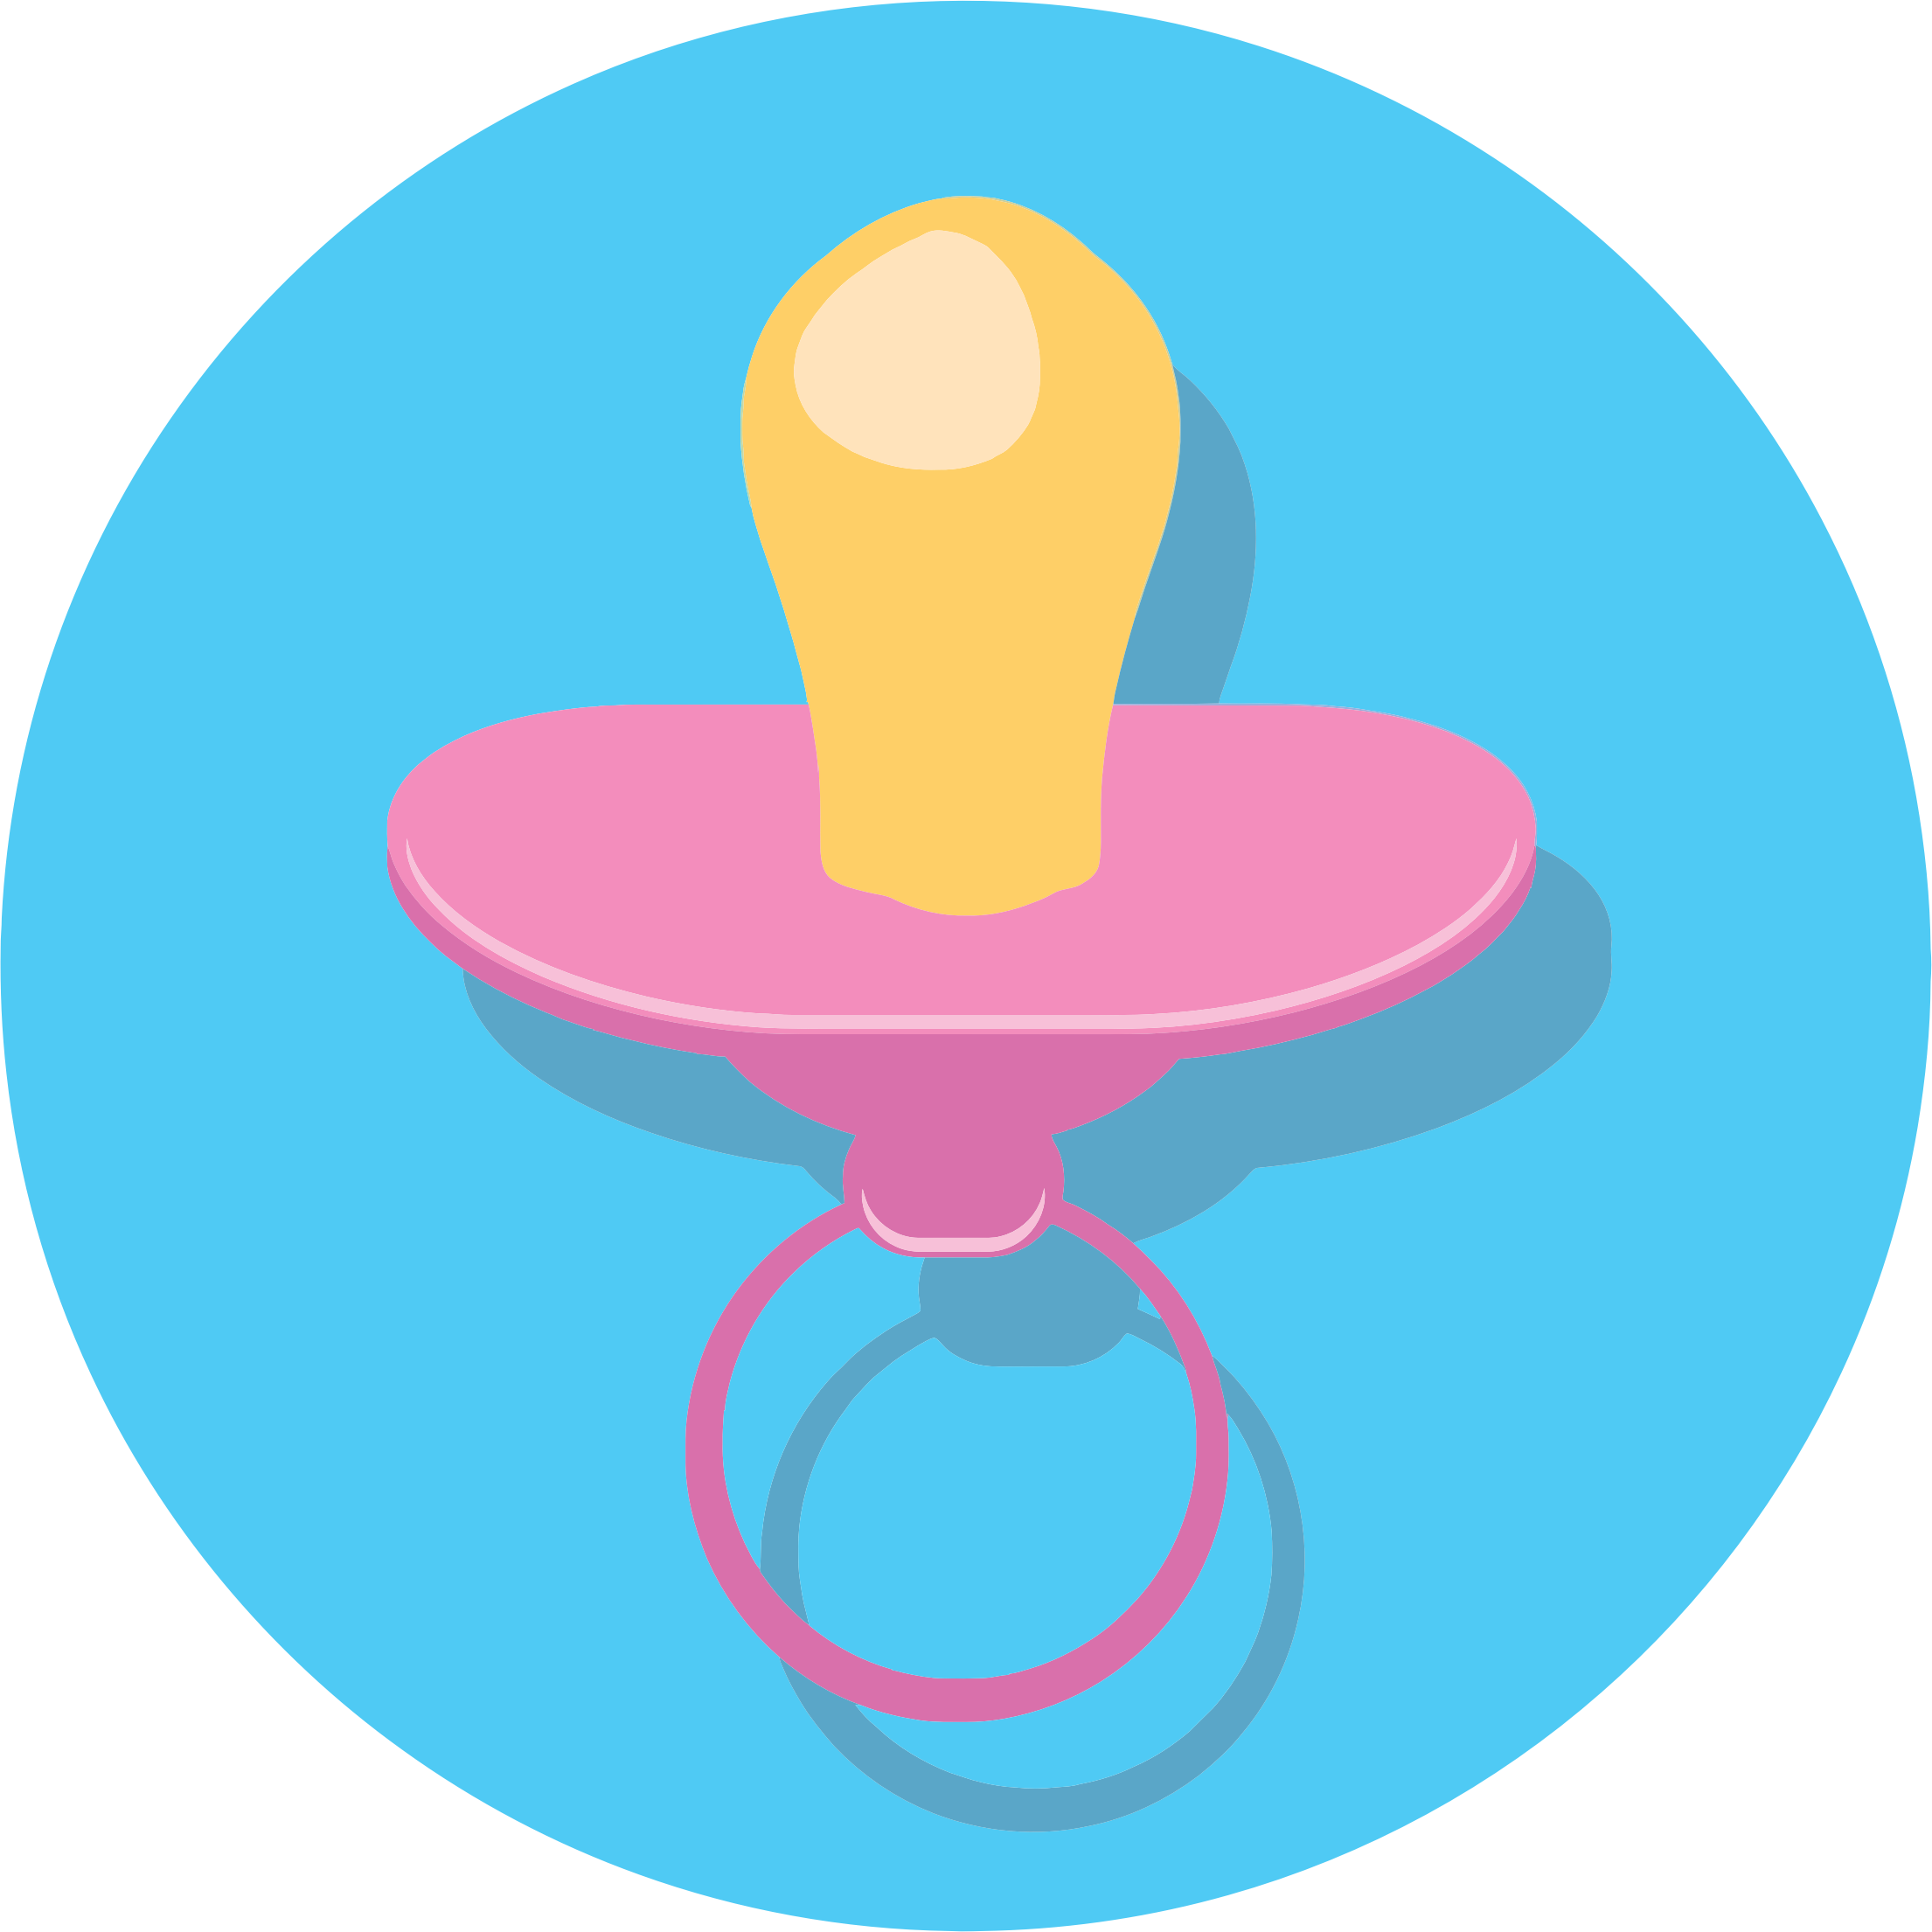 Big Image (Png) - Pacifier, Transparent background PNG HD thumbnail